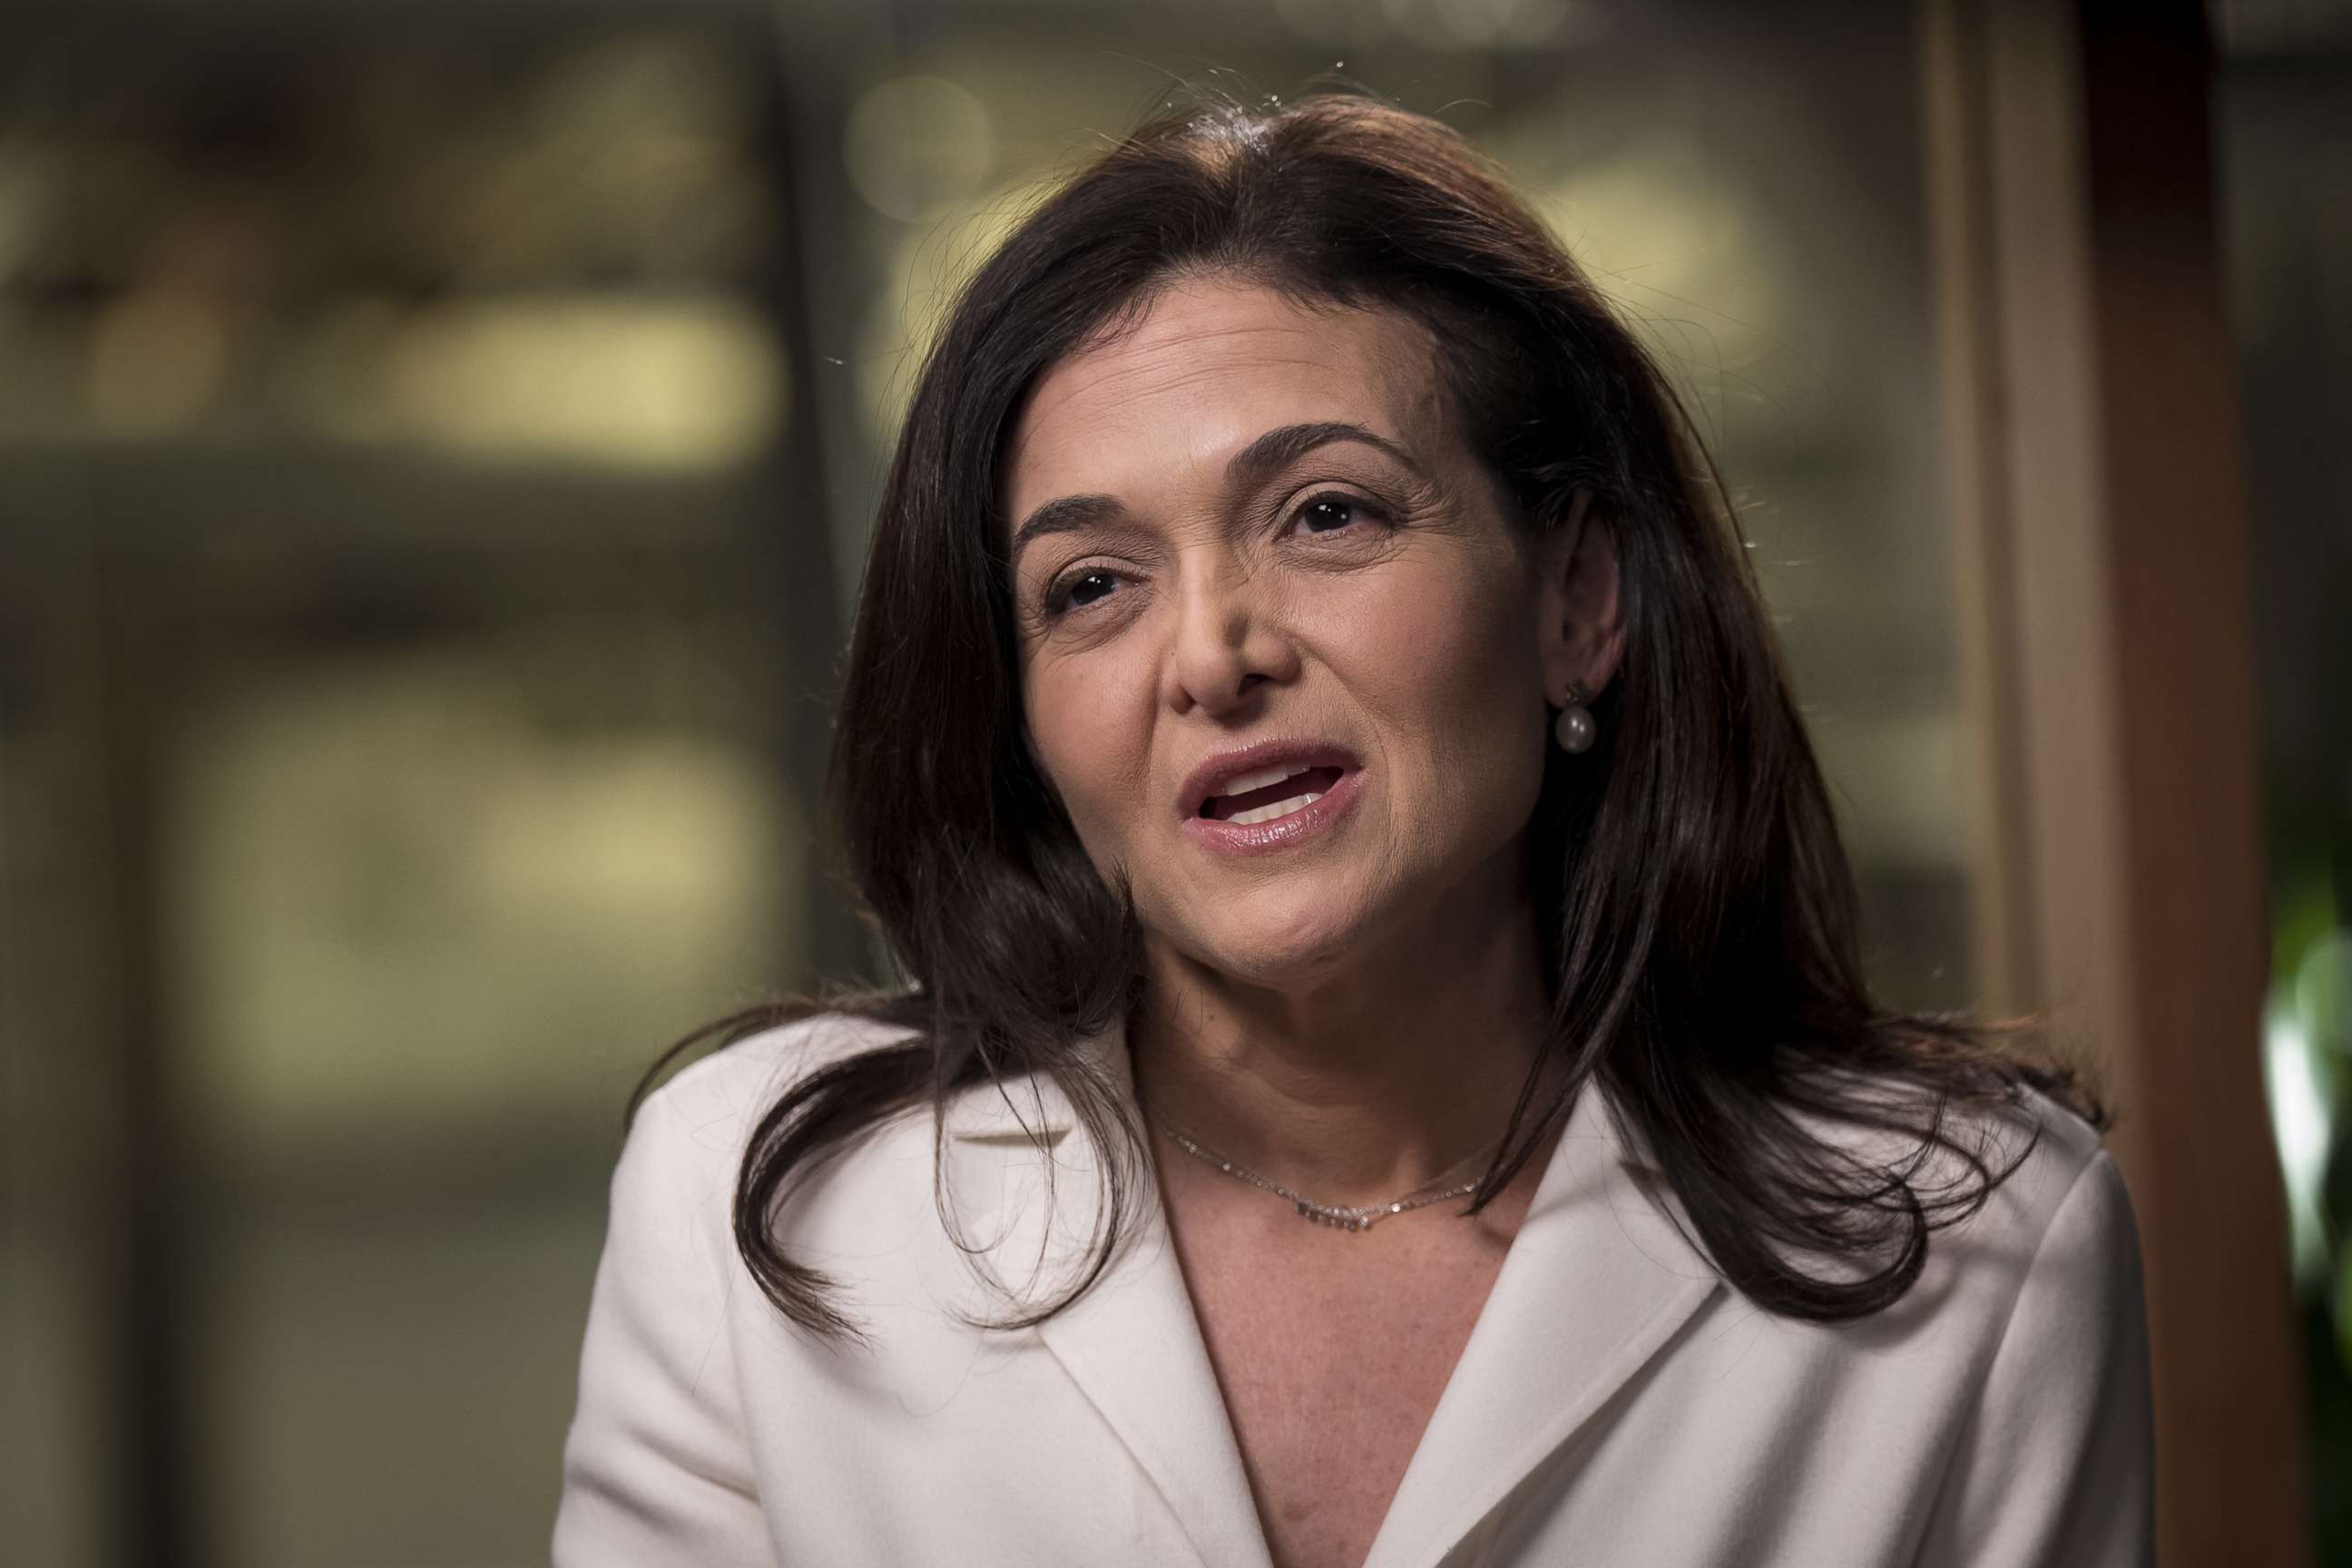 PHOTO: Sheryl Sandberg, chief operating officer of Facebook Inc., participates in an interview at the company's headquarters in Menlo Park, Calif., Jan. 30, 2019.